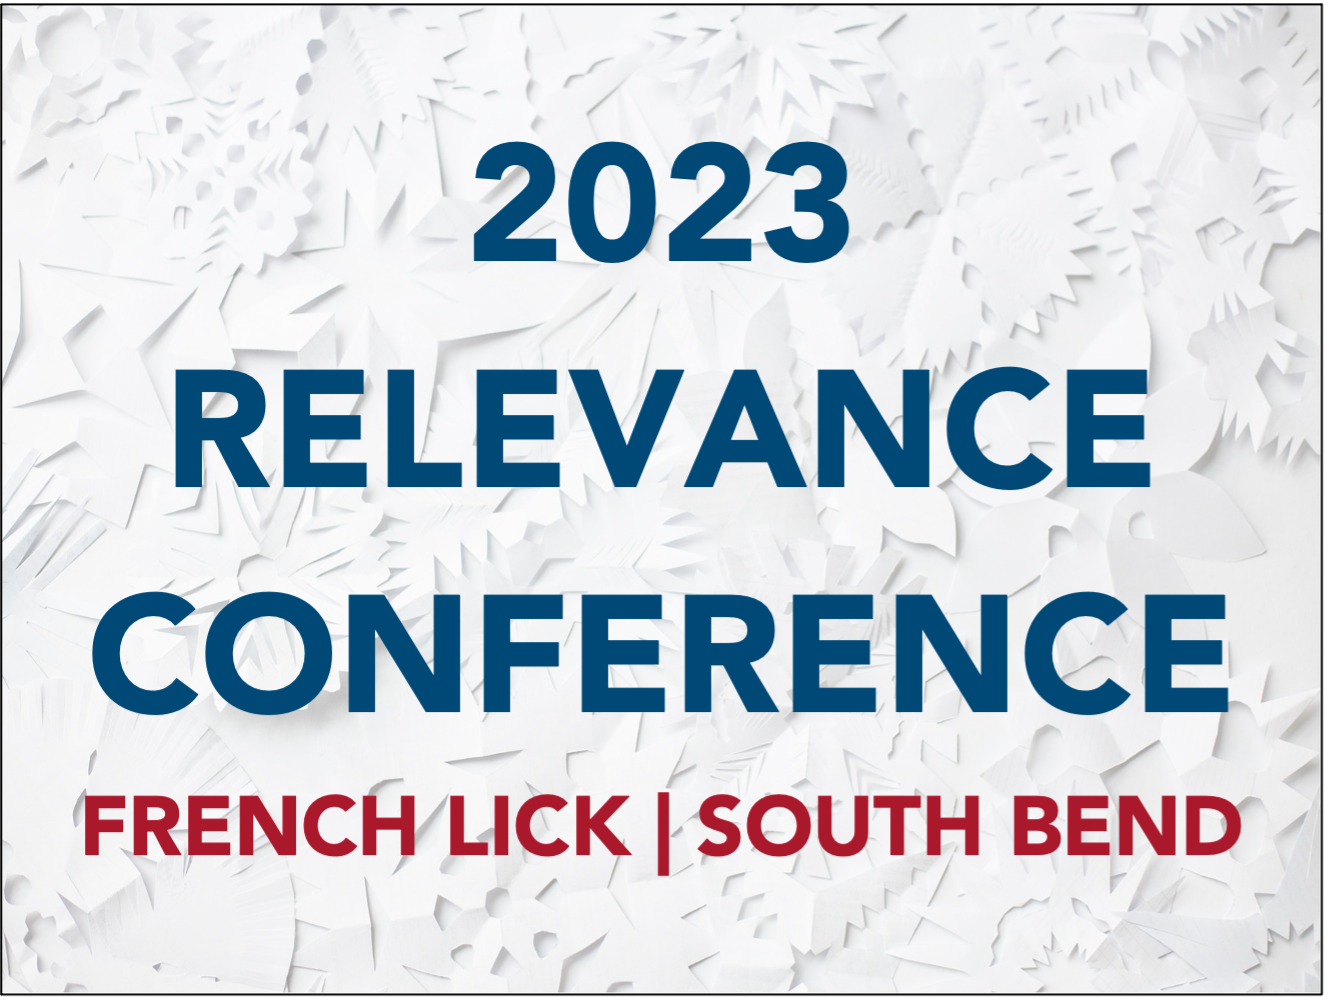 2023 Relevance Conference